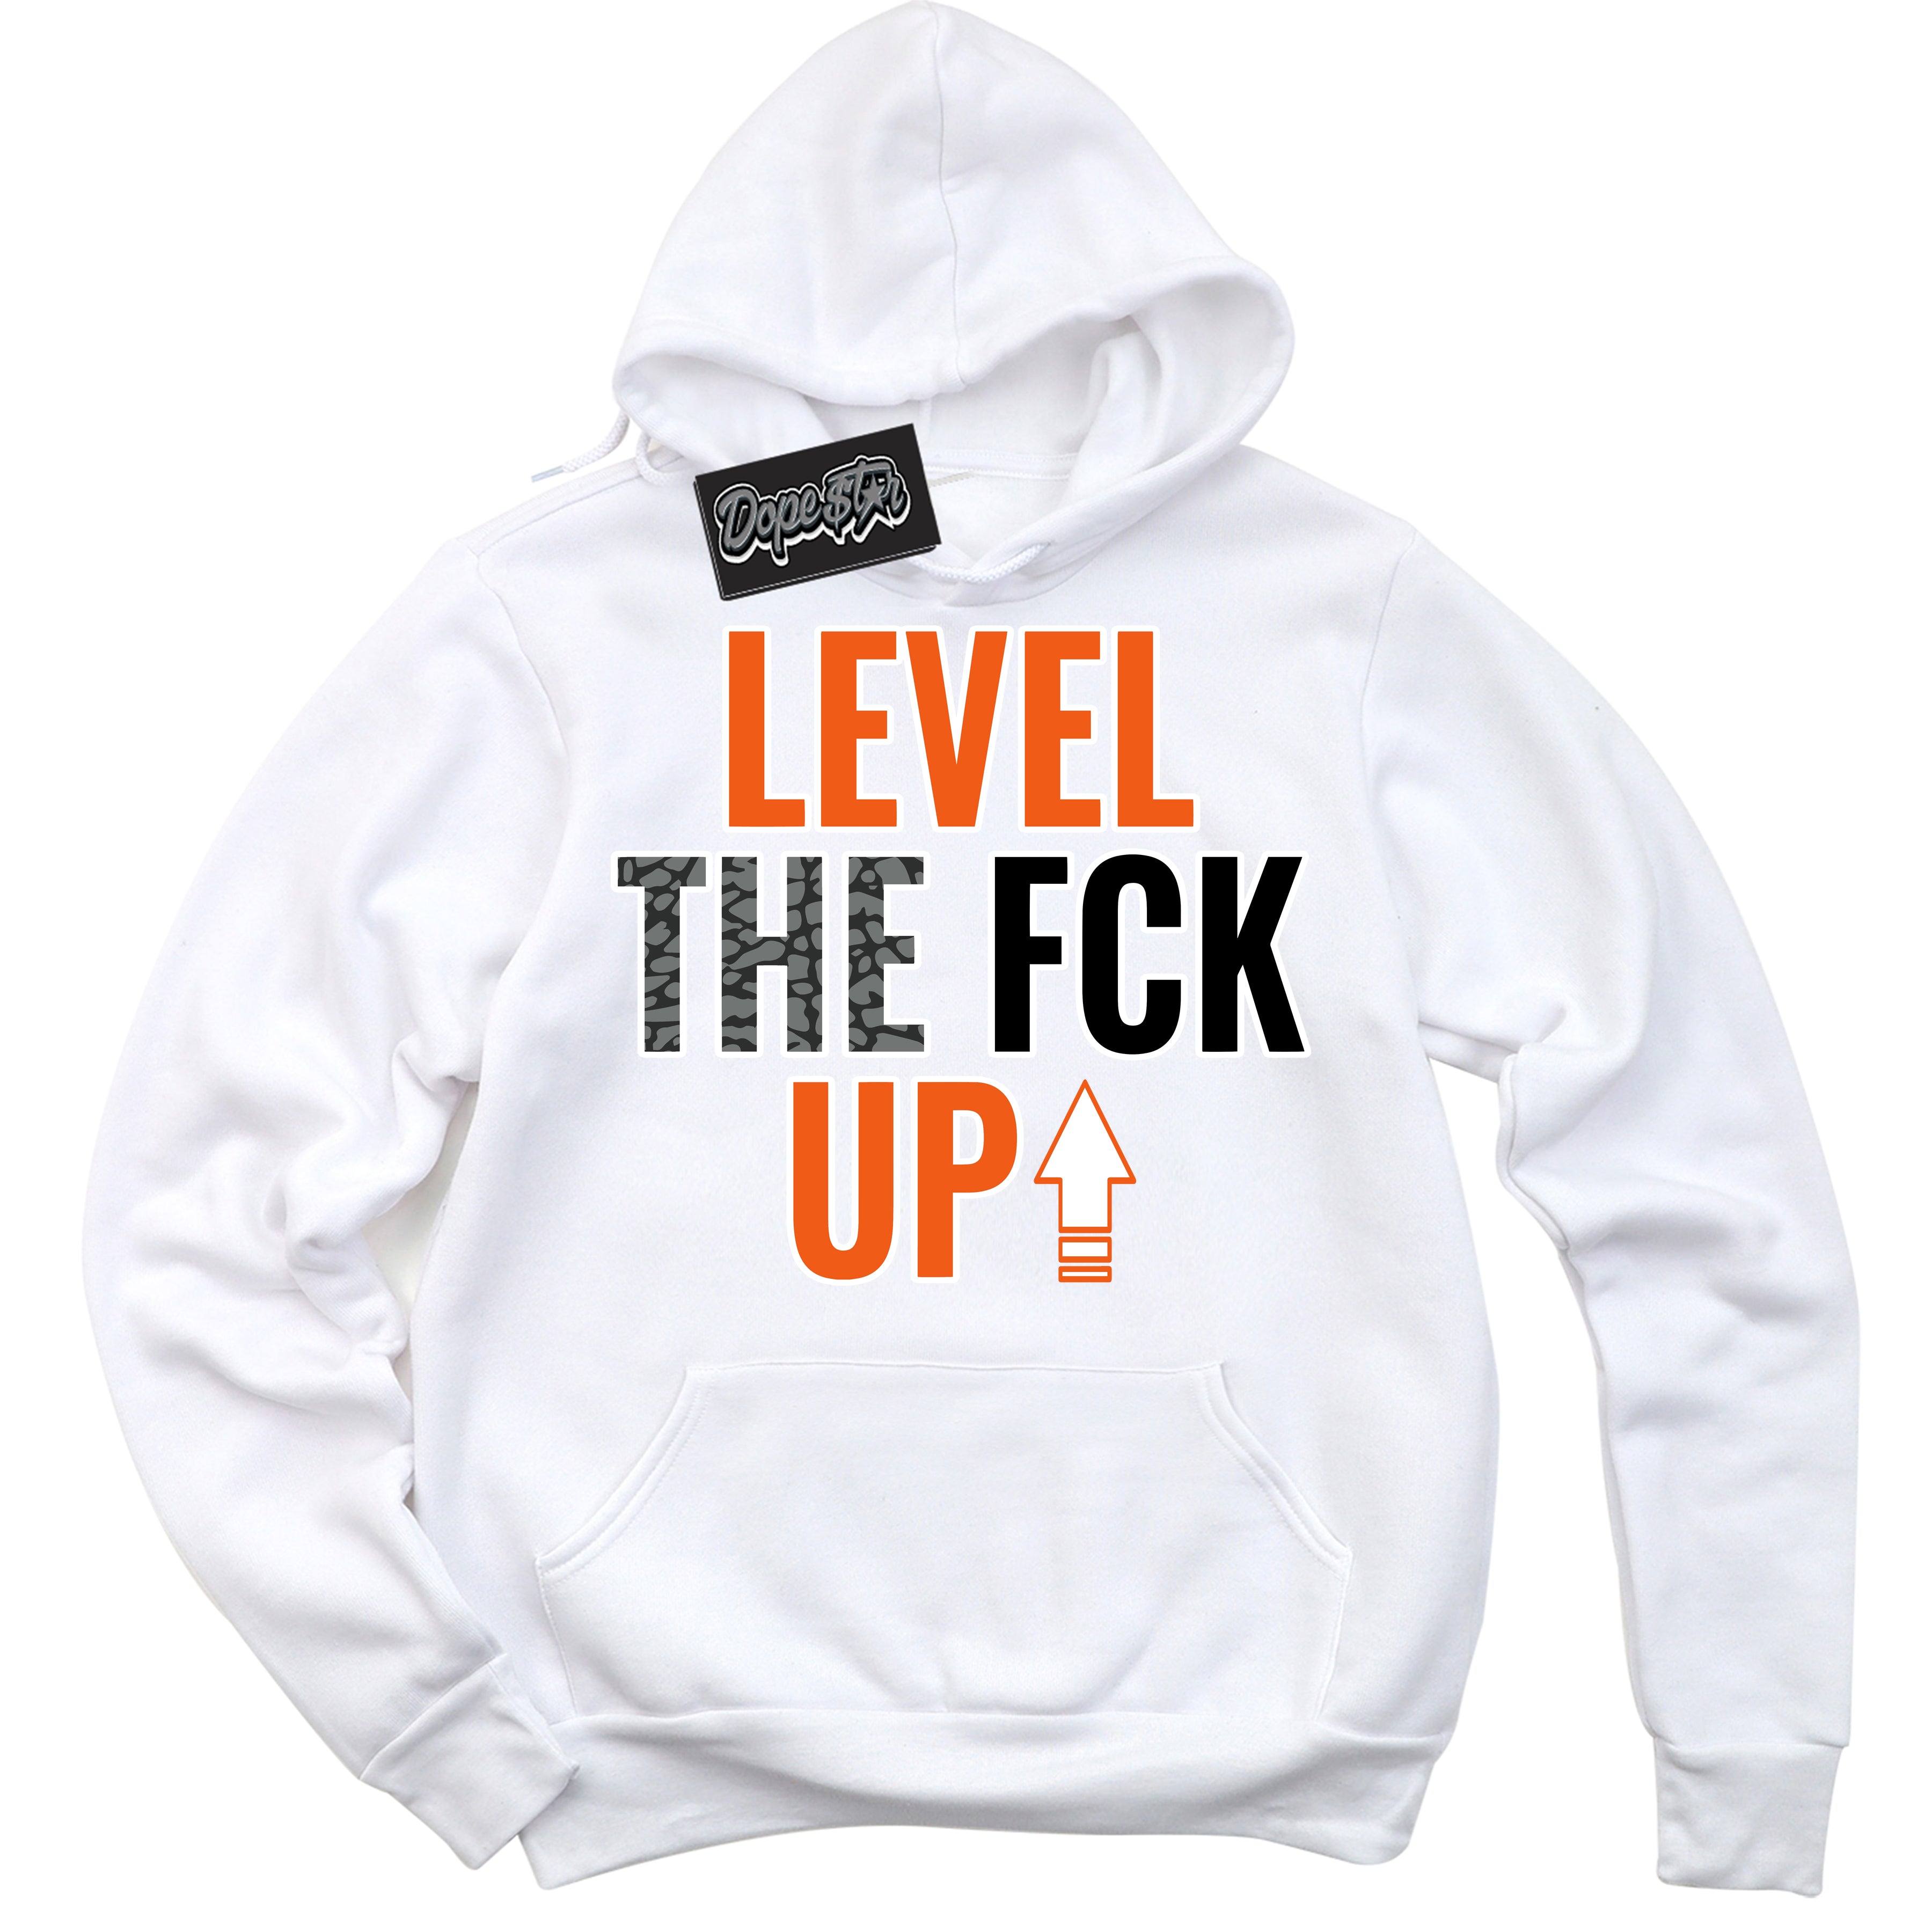 Cool White Graphic DopeStar Hoodie with “ Level The Fck Up “ print, that perfectly matches Fear Pack 3s sneakers